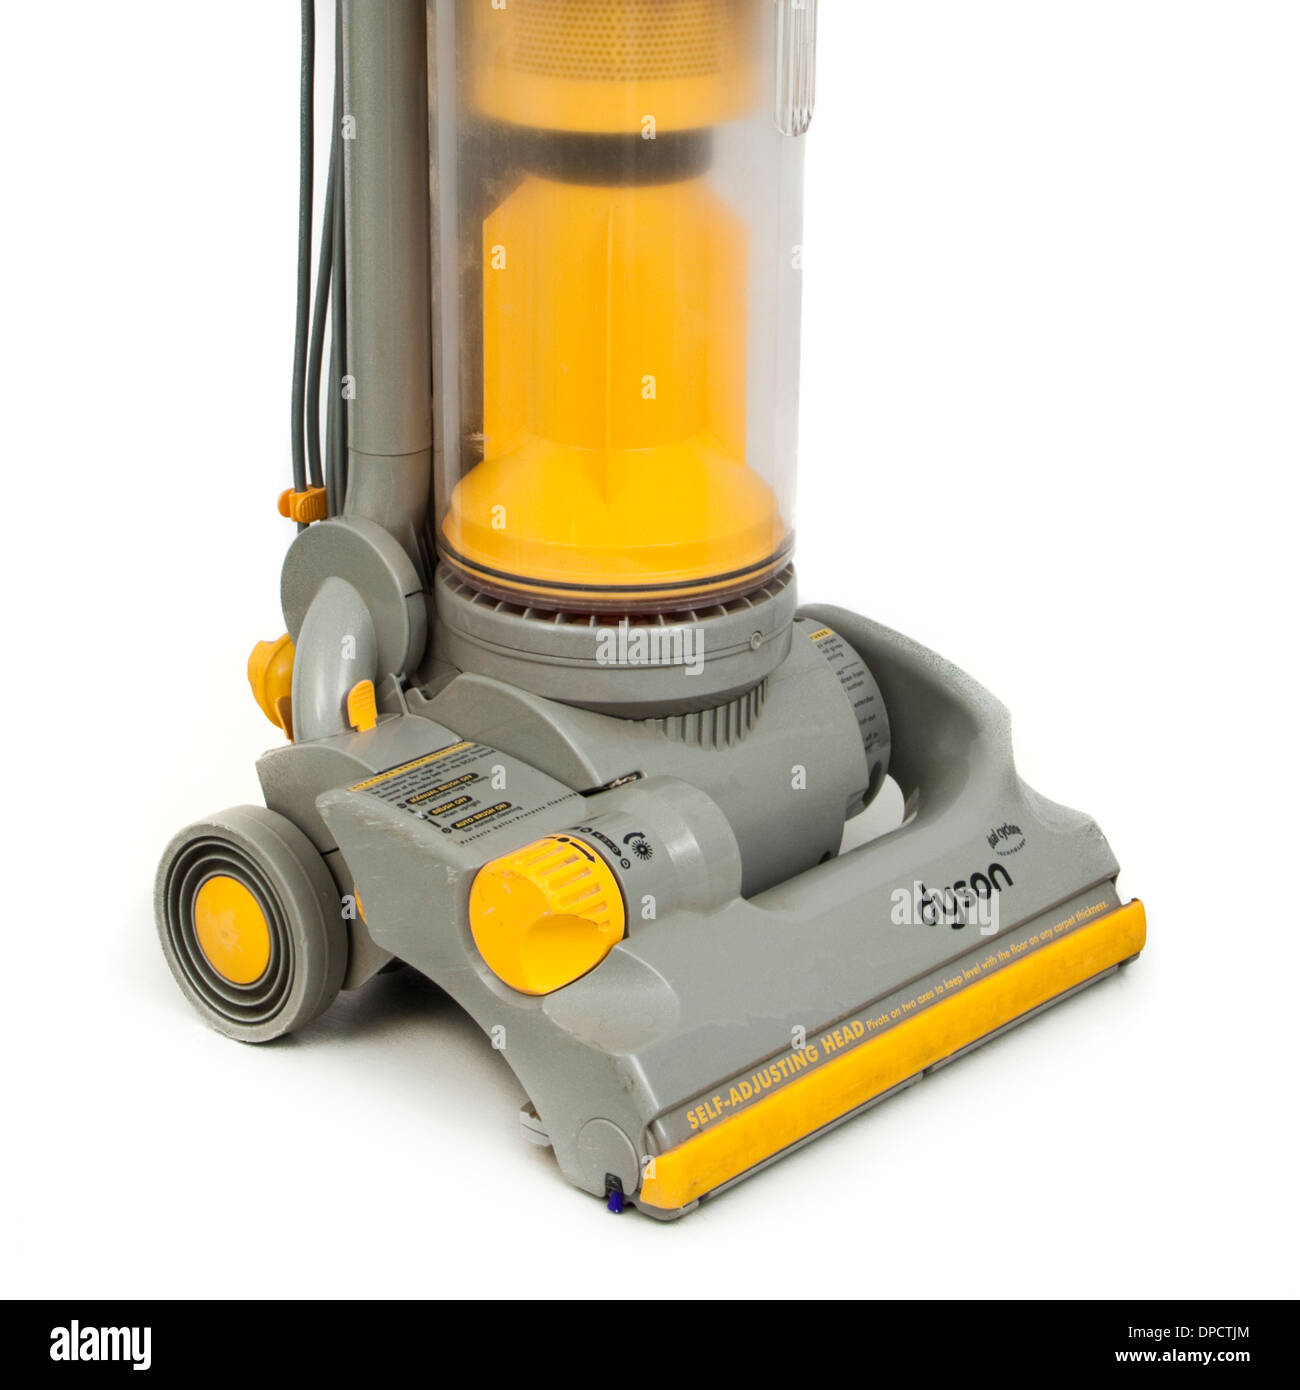 Dyson Vacuum Cleaner High Resolution Stock Photography and Images - Alamy